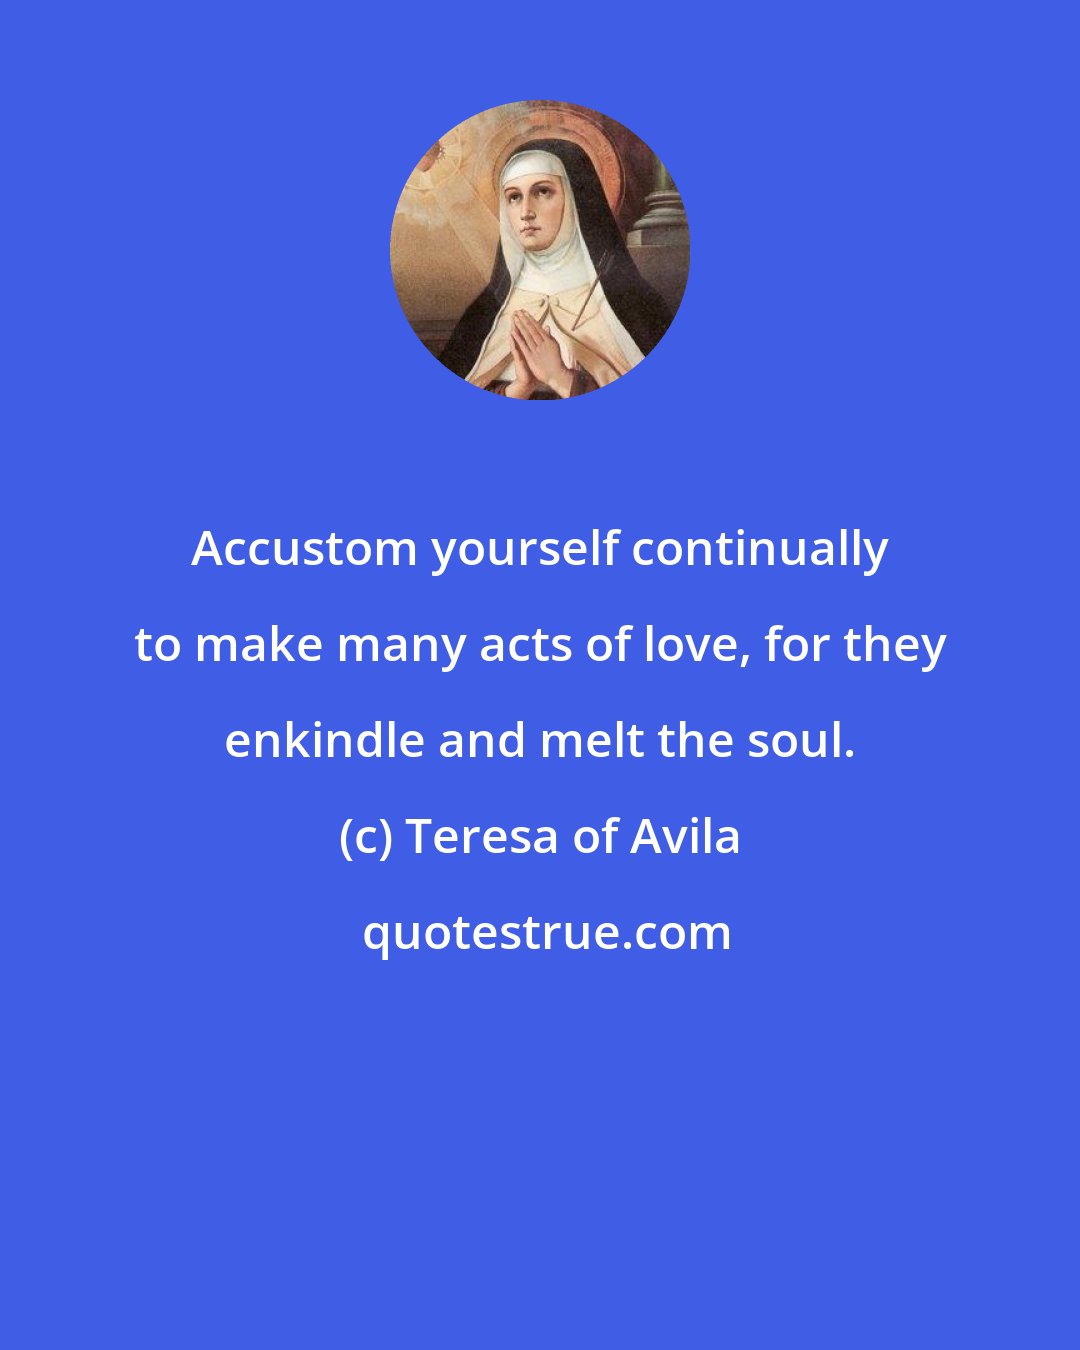 Teresa of Avila: Accustom yourself continually to make many acts of love, for they enkindle and melt the soul.